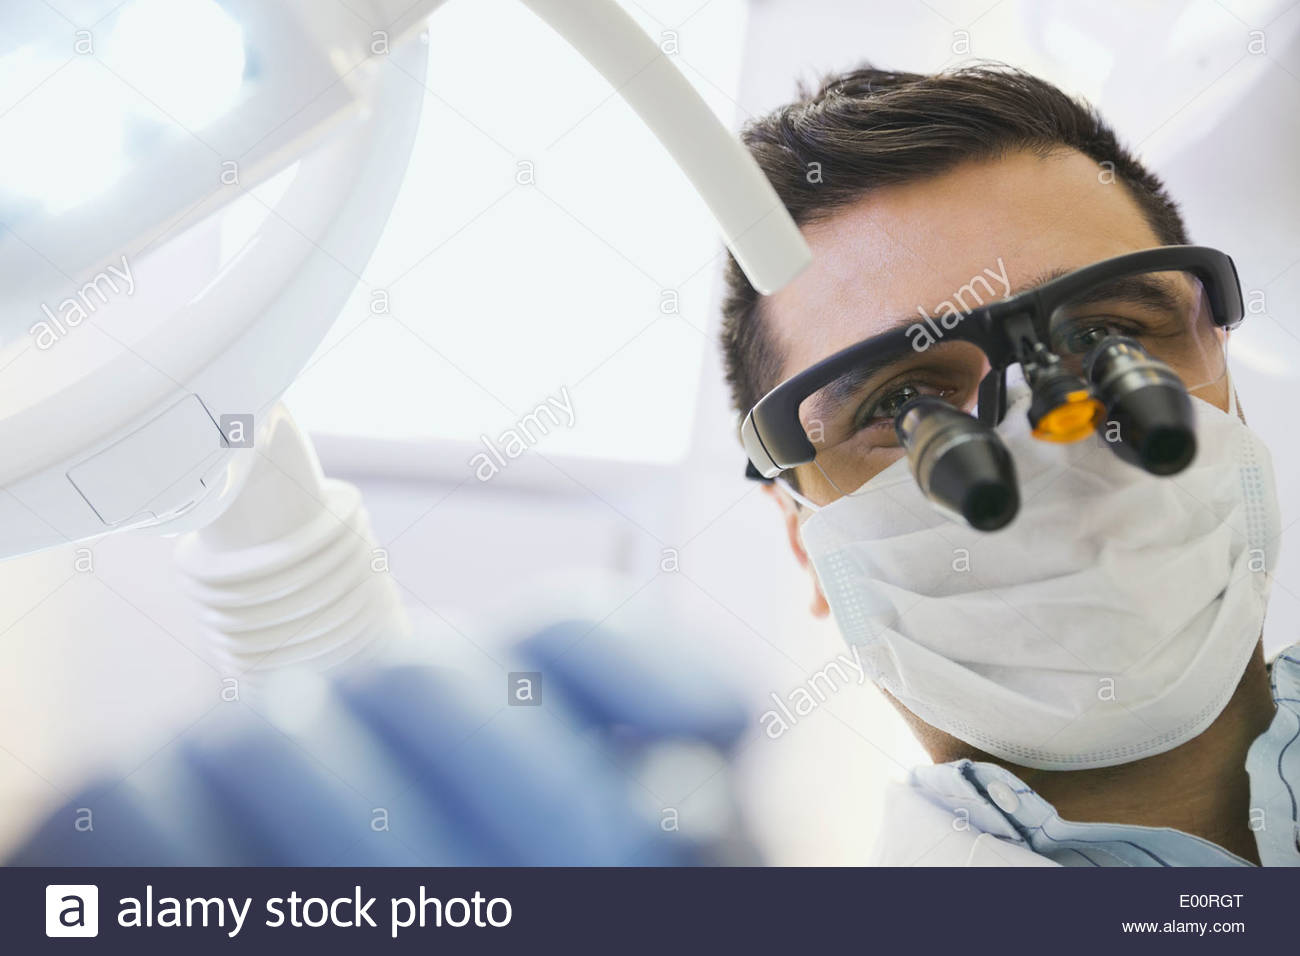 Dentist in dental loupes performing checkup Stock Photo